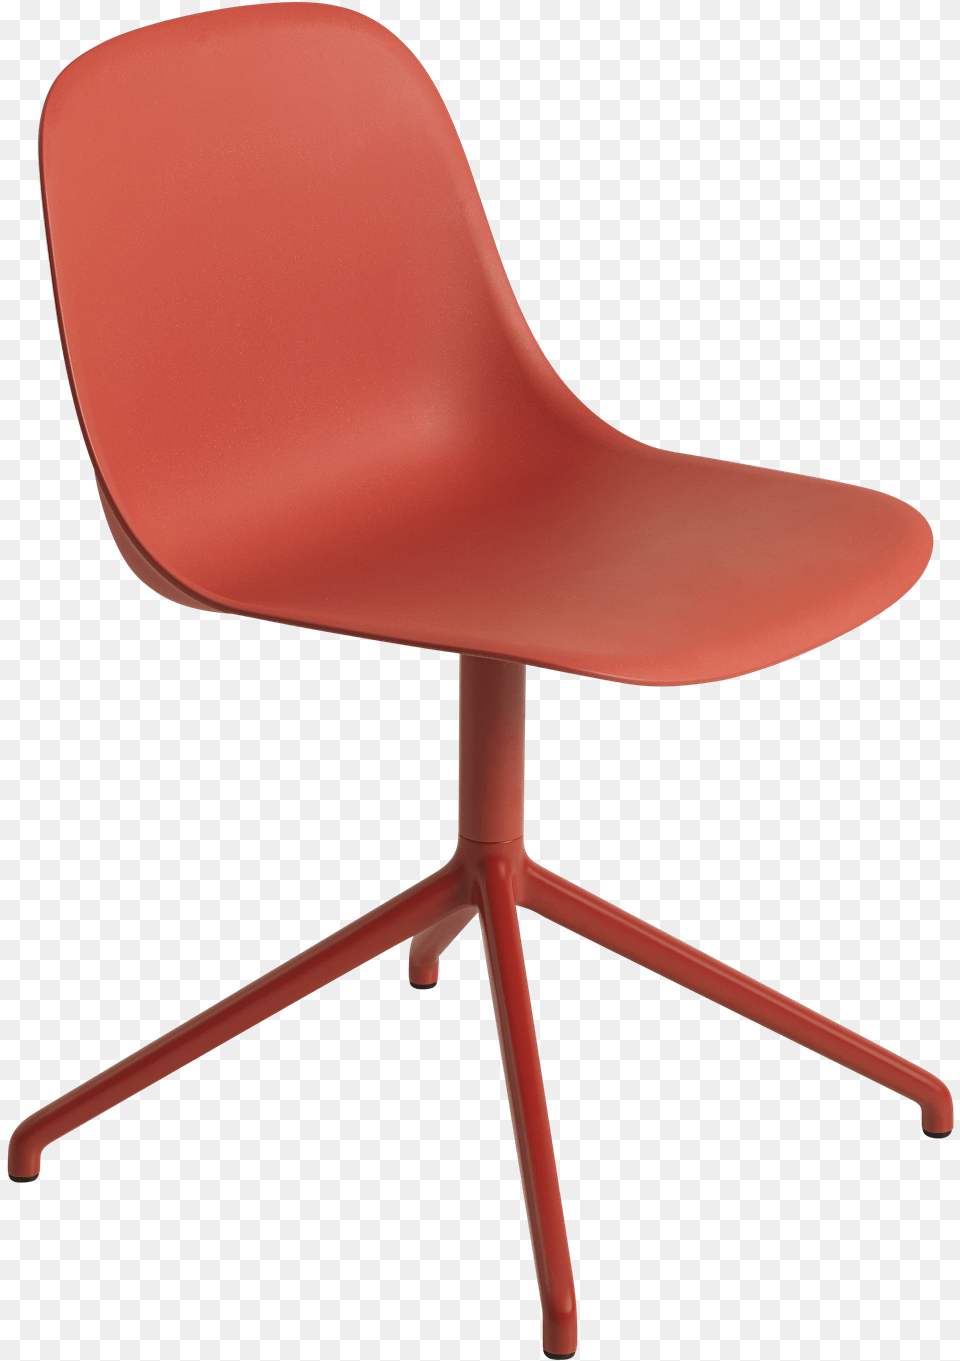 Affordable With 25 Amazing Table And Chairs Top View Office Chair, Furniture, Plywood, Wood Png